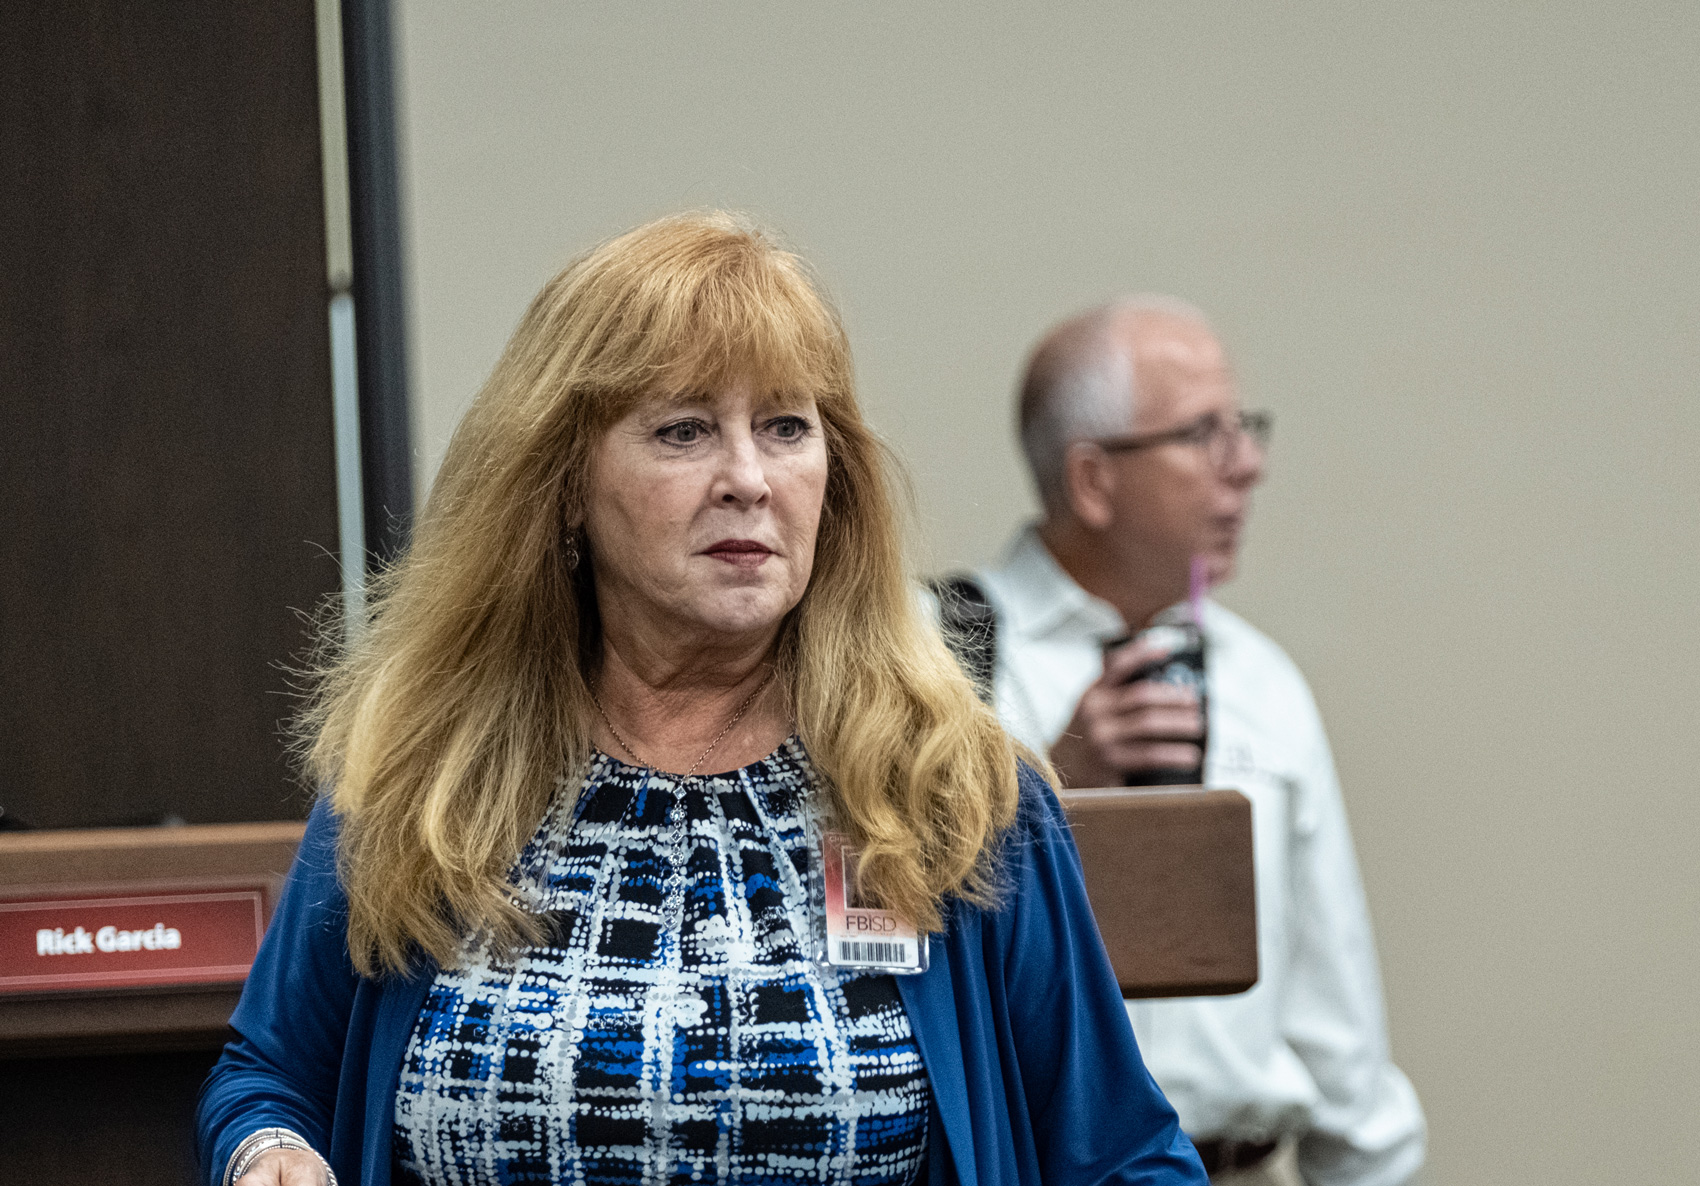 Fort Bend ISD Christie Whitbeck makes her way through a board meeting Thursday at the district's headquarters in Sugar Land.